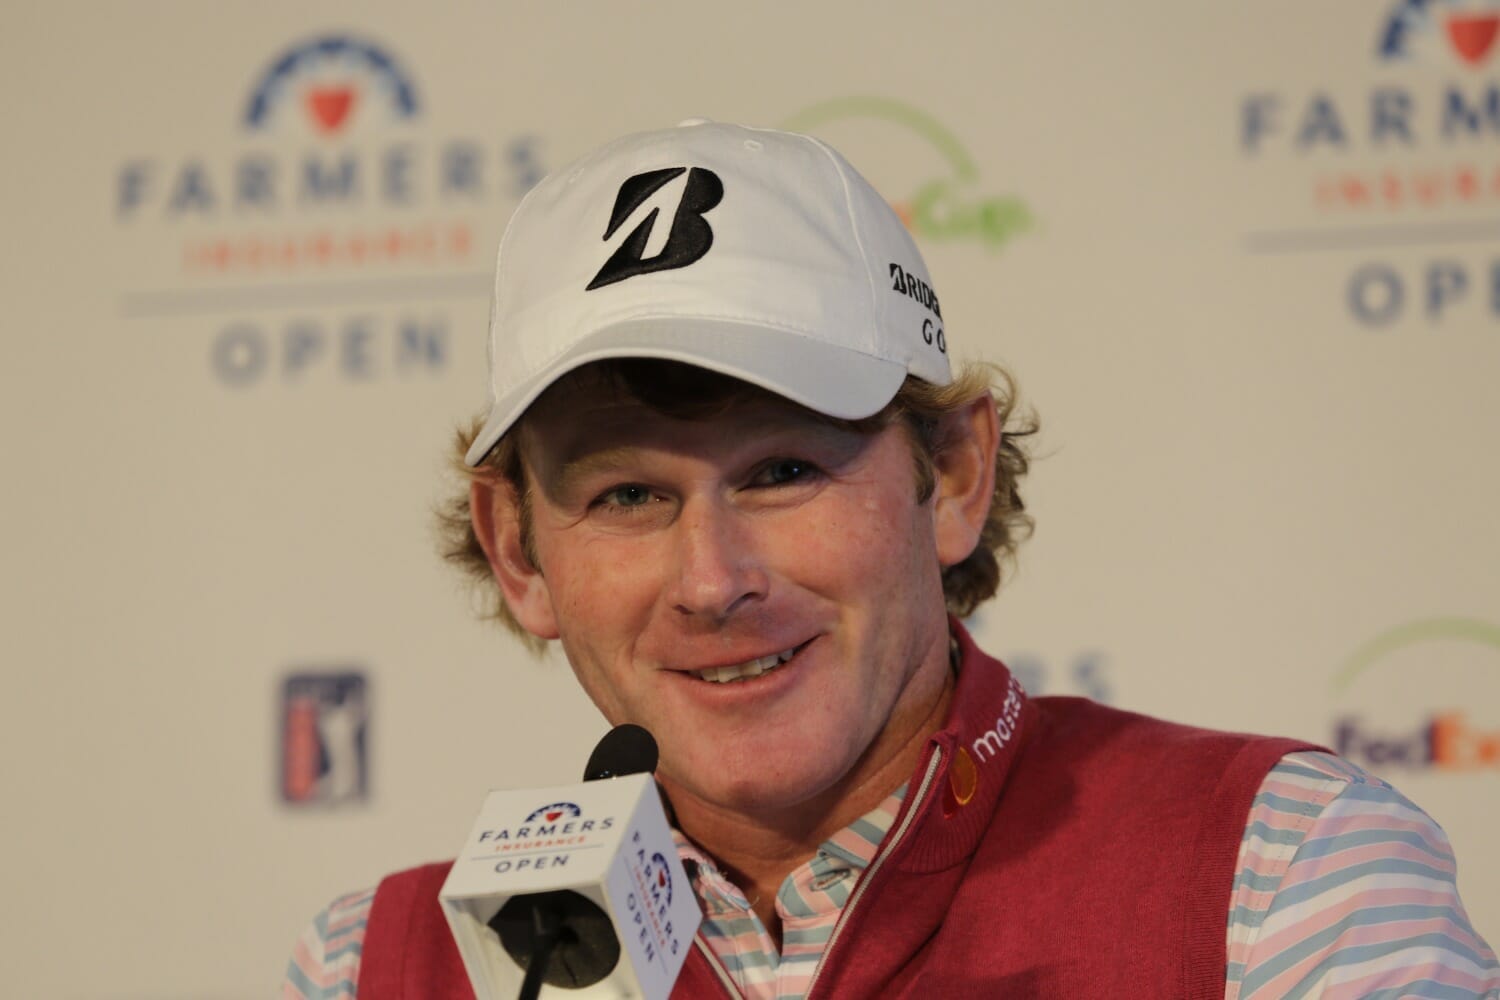 Snedeker & Rodgers lead with Lowry 9 back at the Farmers